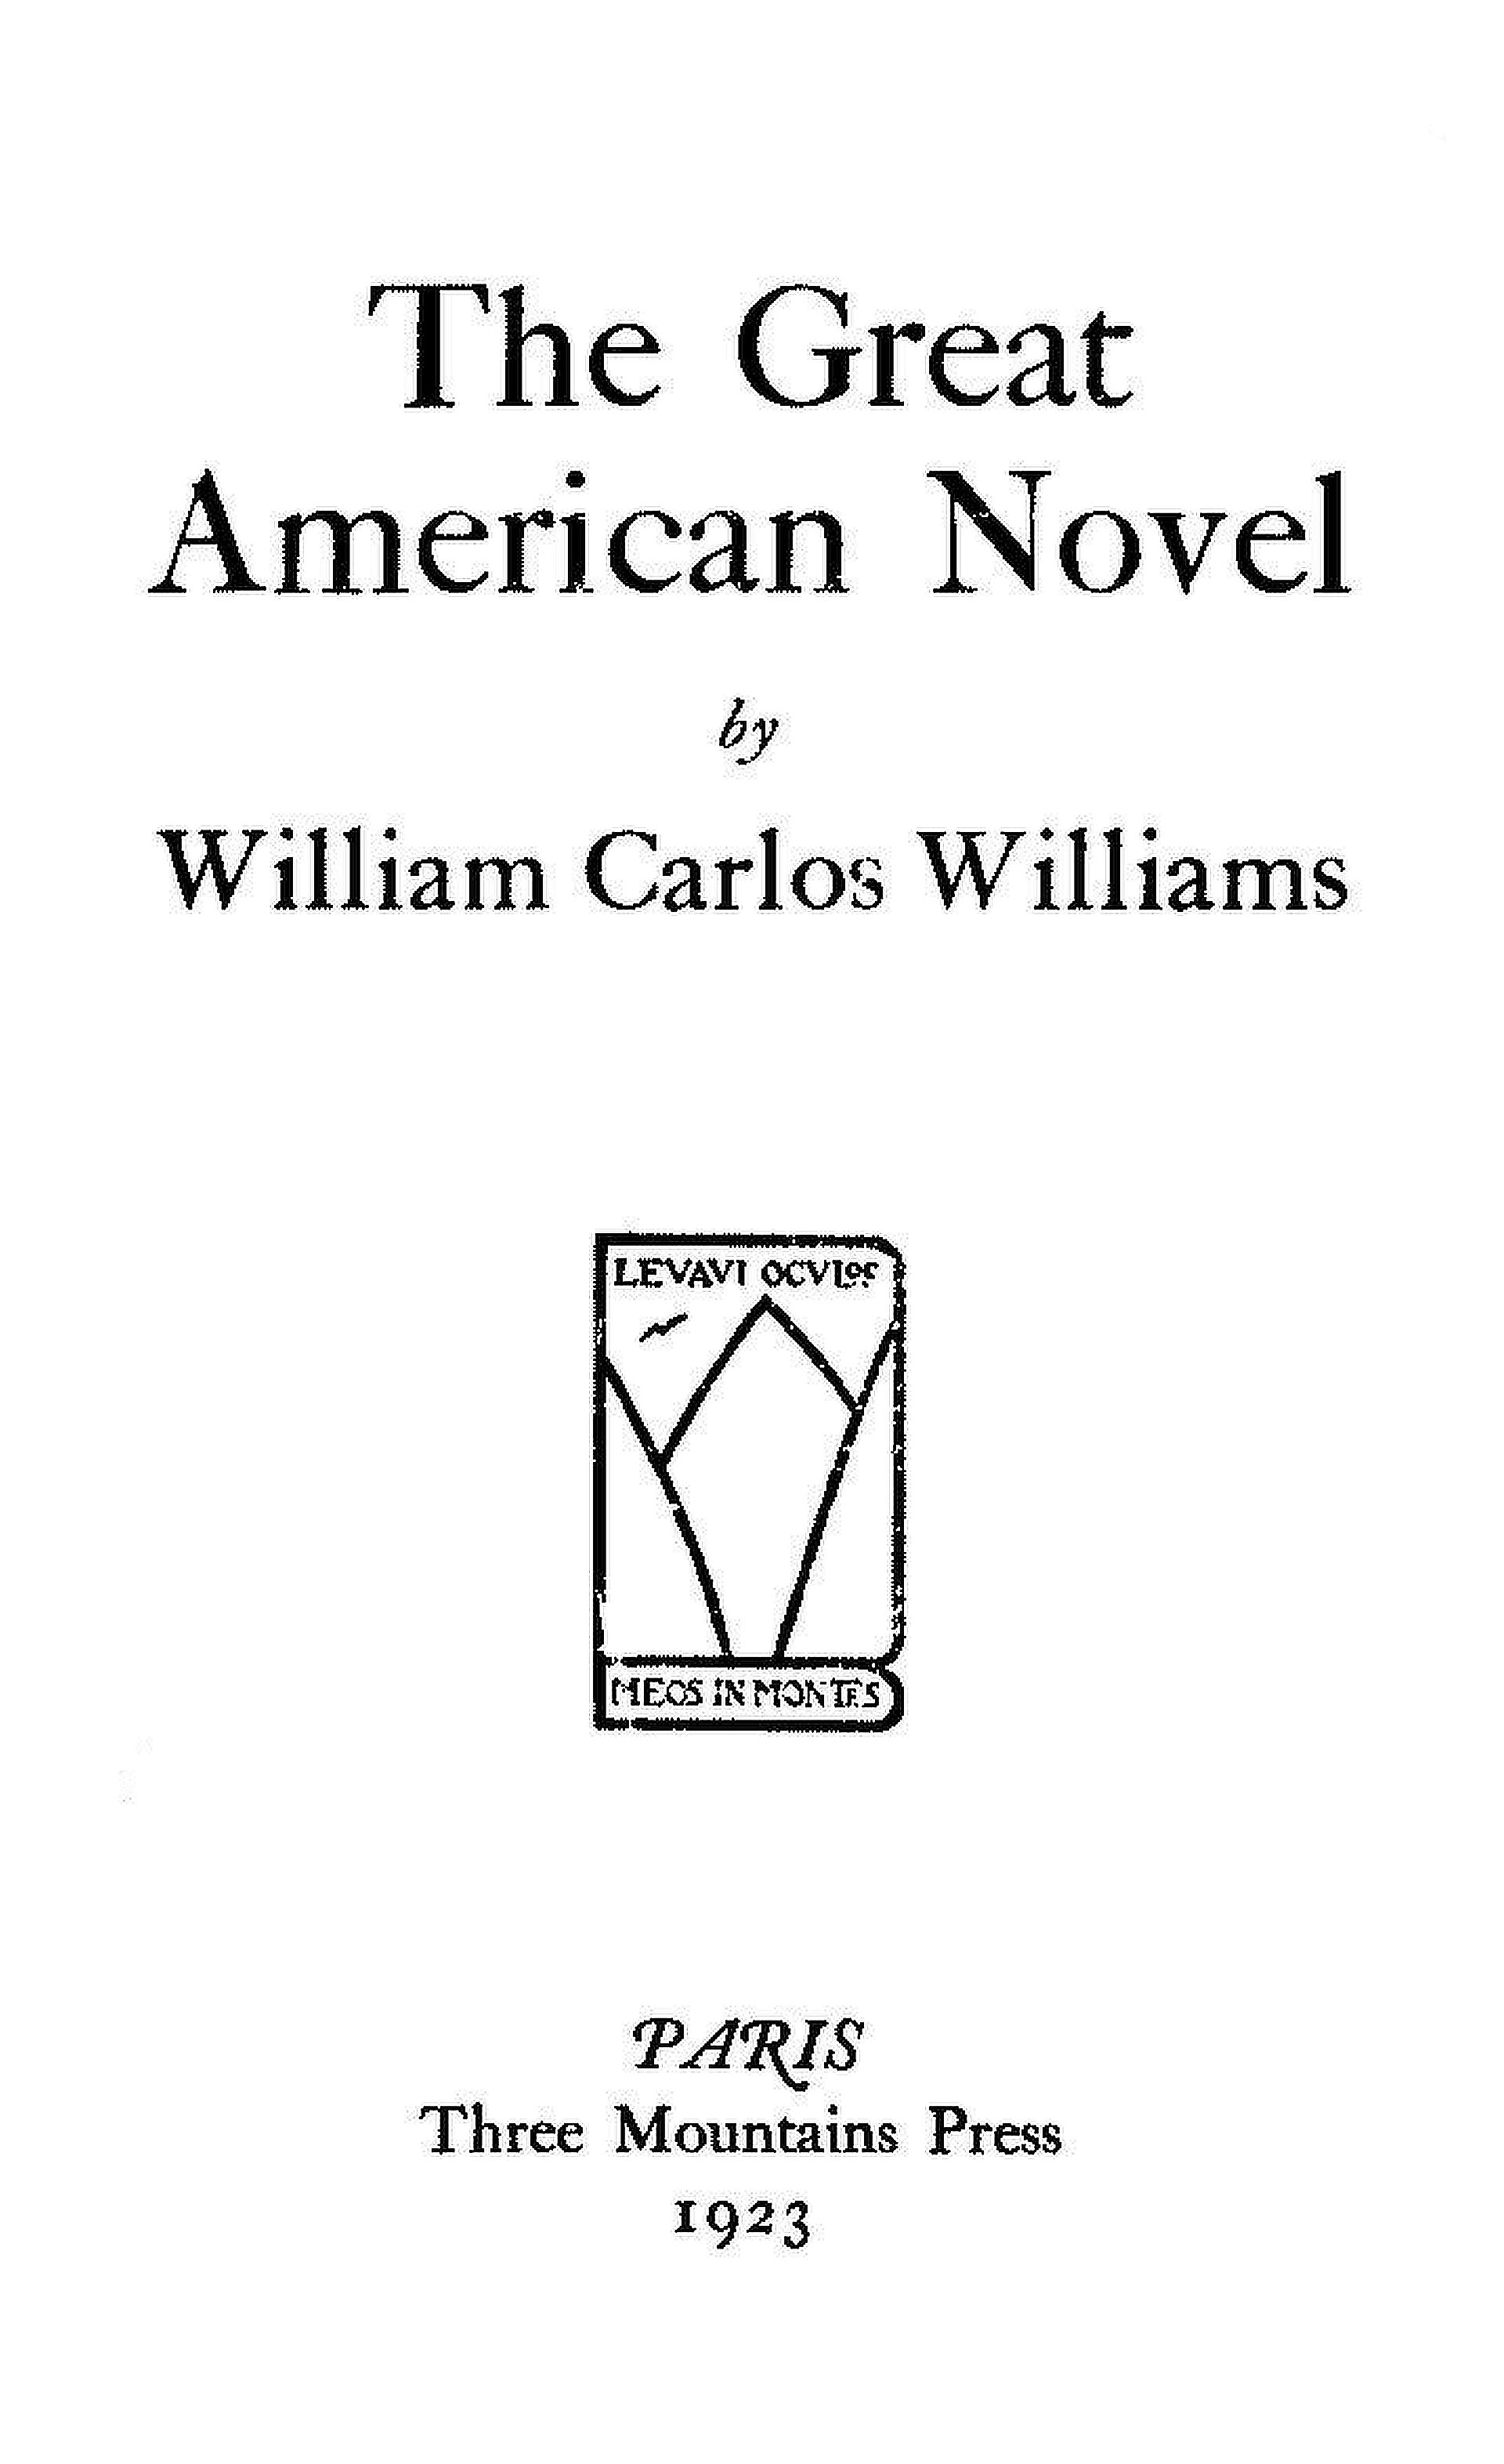 The Project Gutenberg eBook of The Great American Novel, by William Carlos  Williams.